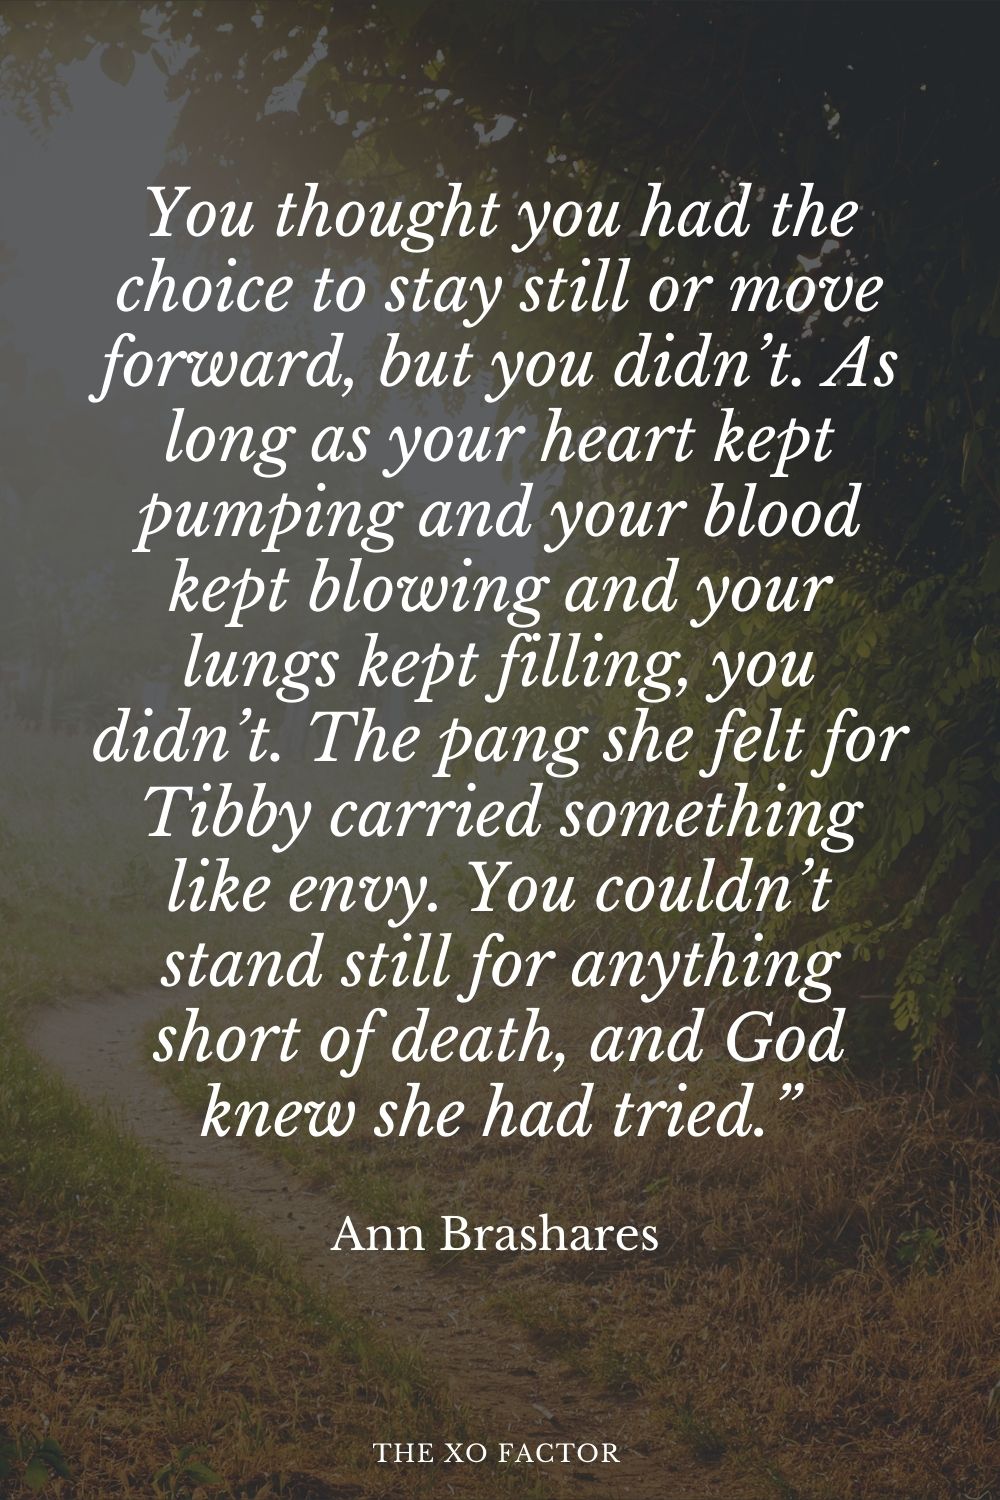 You thought you had the choice to stay still or move forward, but you didn’t. As long as your heart kept pumping and your blood kept blowing and your lungs kept filling, you didn’t. The pang she felt for Tibby carried something like envy. You couldn’t stand still for anything short of death, and God knew she had tried.” Ann Brashares